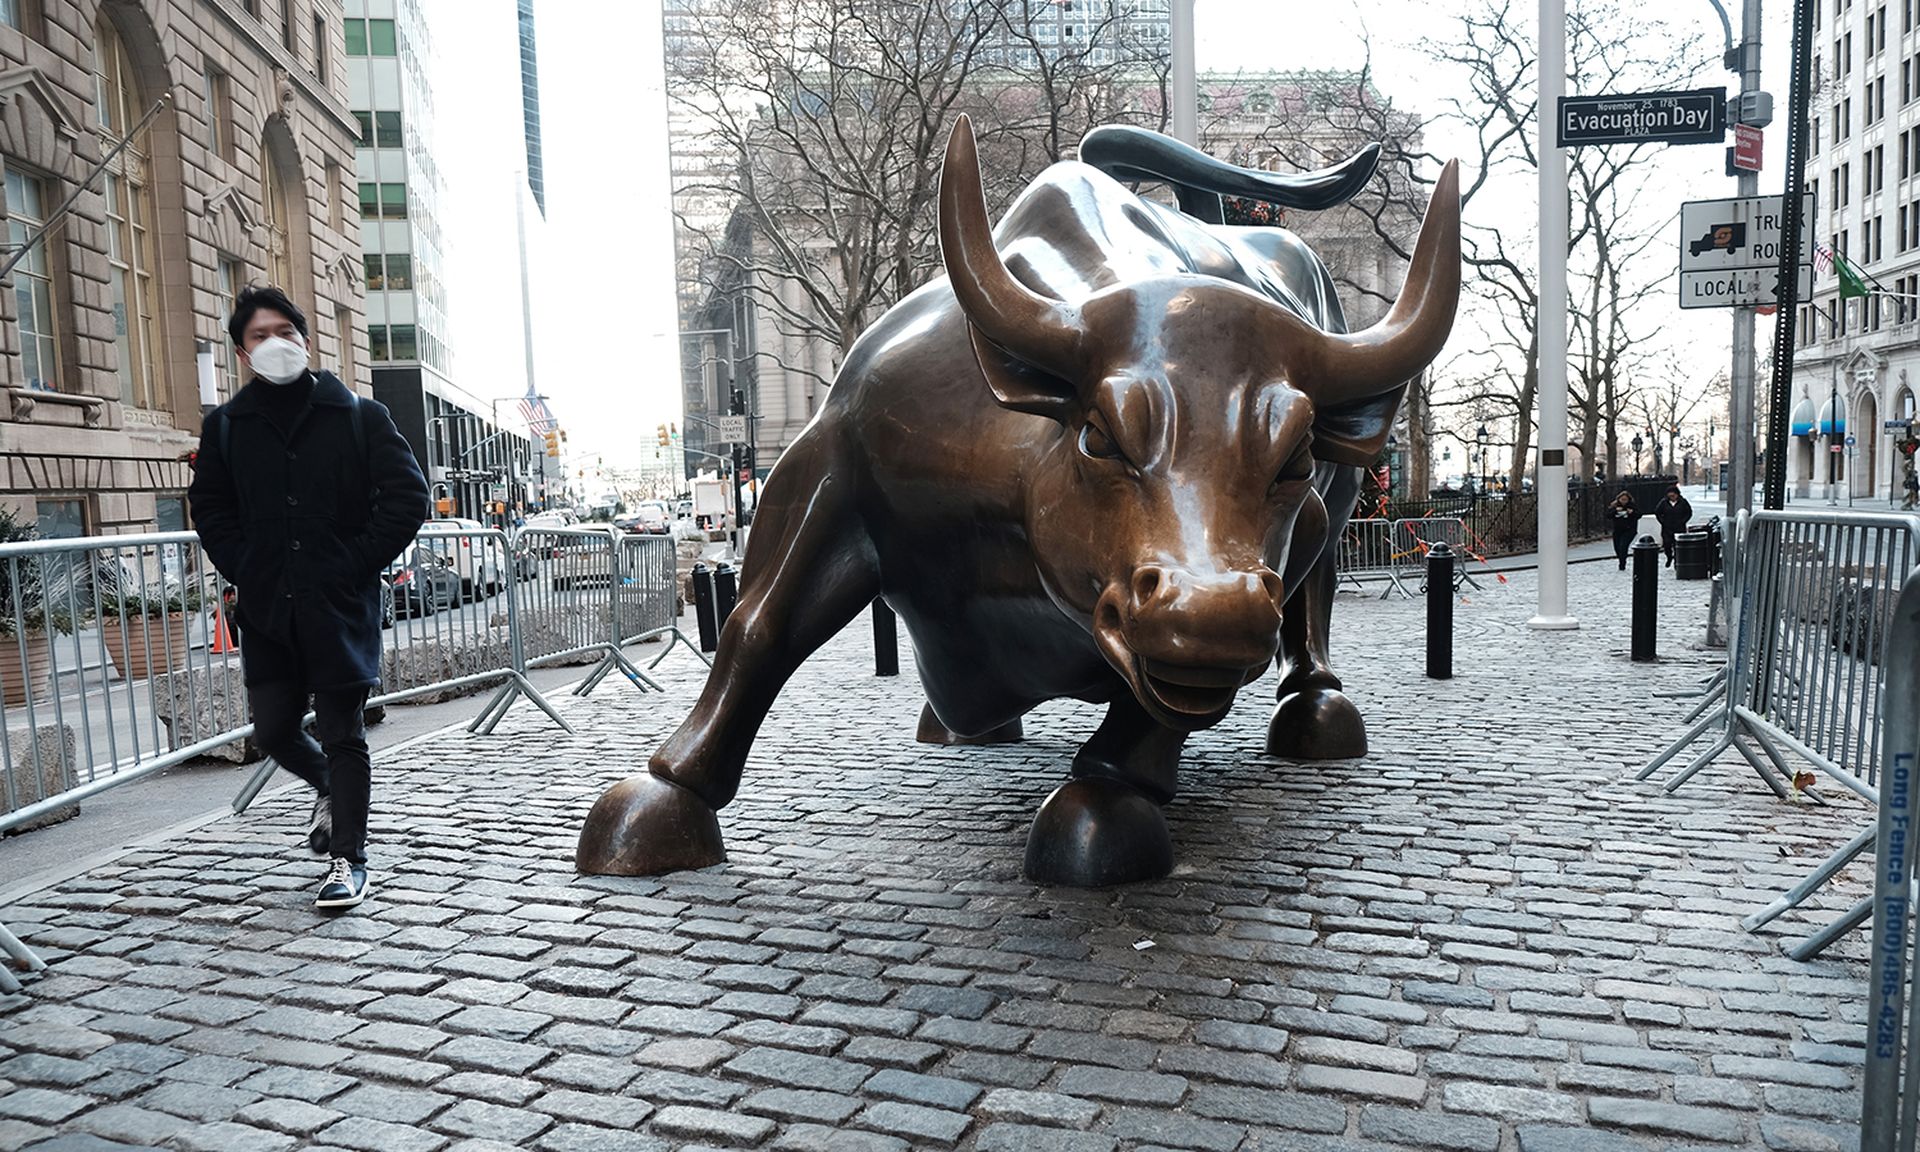 A man walks by the Wall Street Bull by the New York Stock Exchange (NYSE) on Jan. 11, 2022, in New York City. (Photo by Spencer Platt/Getty Images)